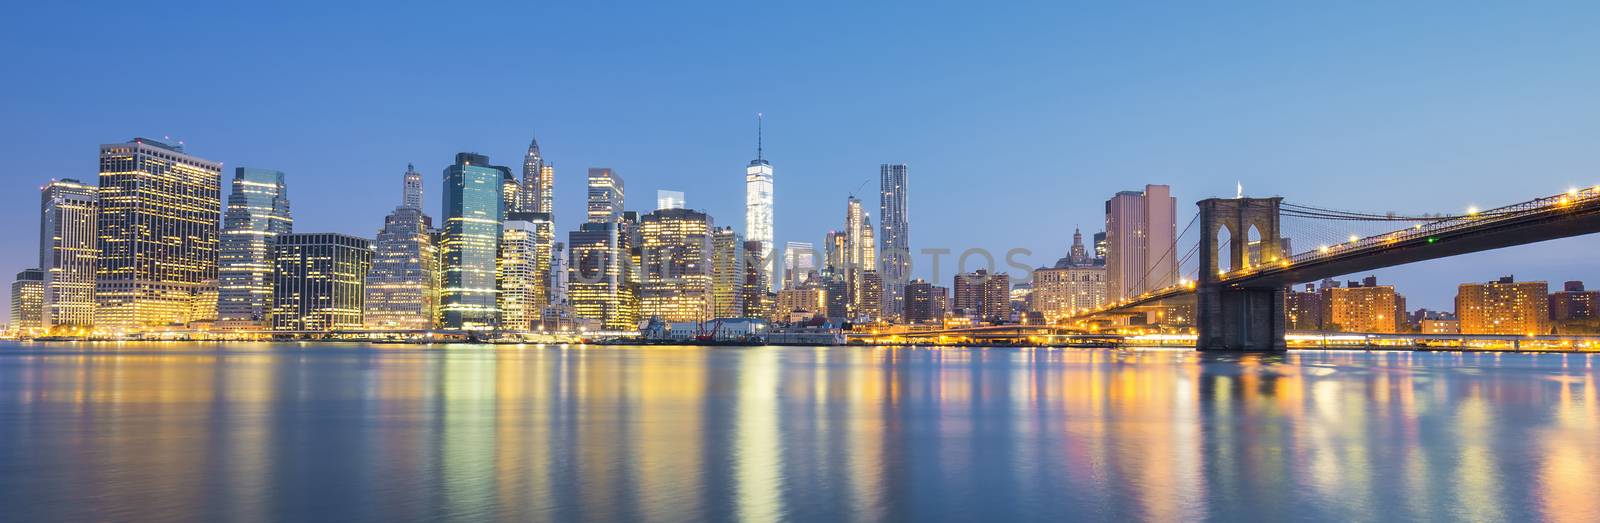 View of New York City Manhattan midtown at dusk by vwalakte